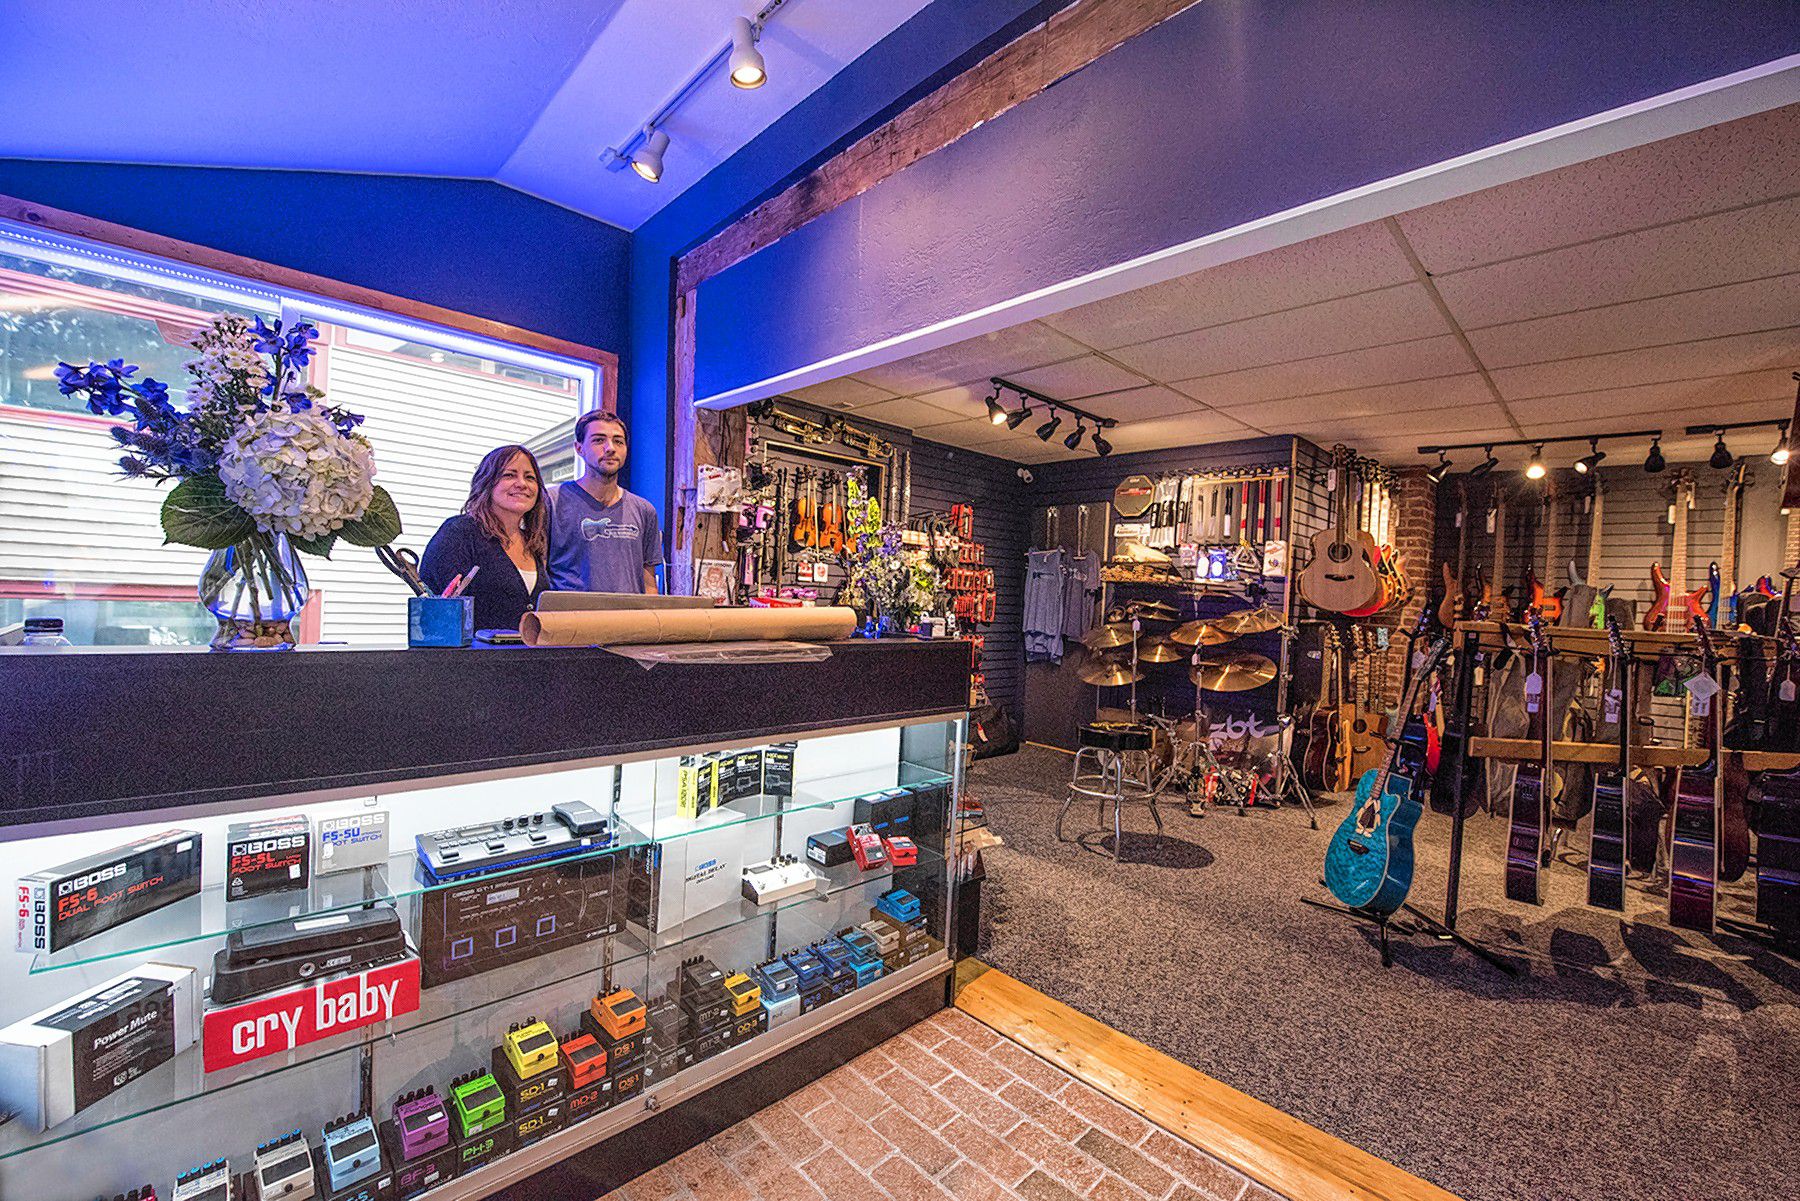 Barb McKelvy, left, and her business partner, Tyler Geno, have reopened Blue Mountain Guitar in an alcove of shops on Main Street in New London, directly across from Colby-Sawyer College. (Courtesy photograph)